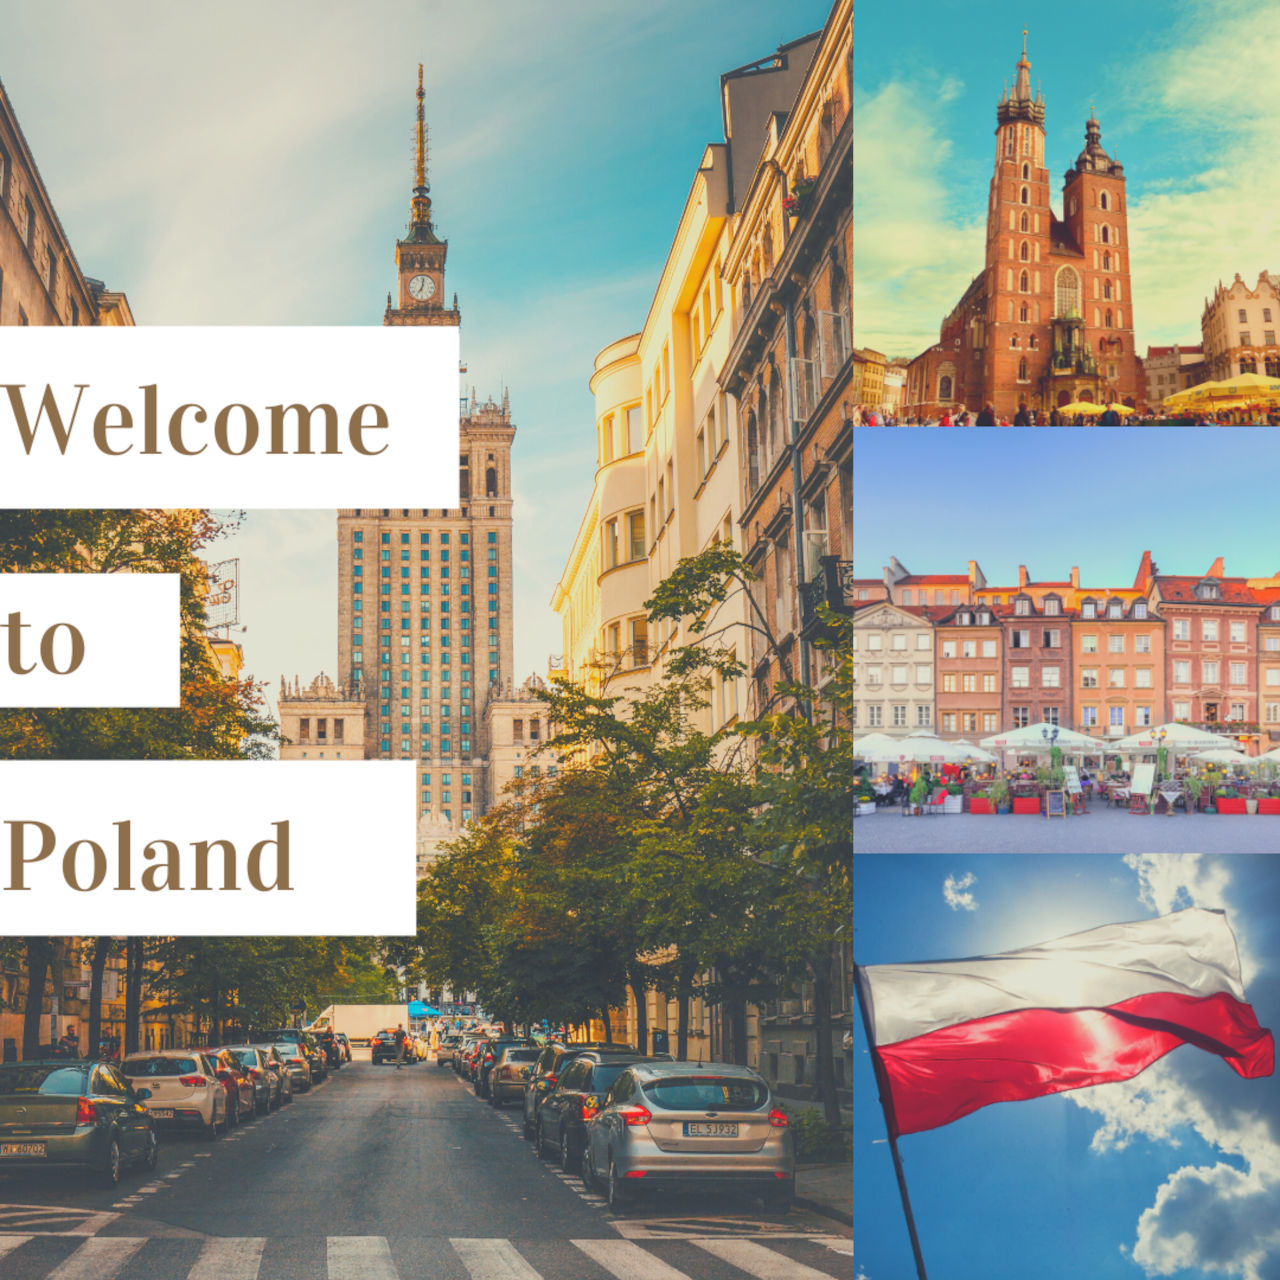 travel to poland from us